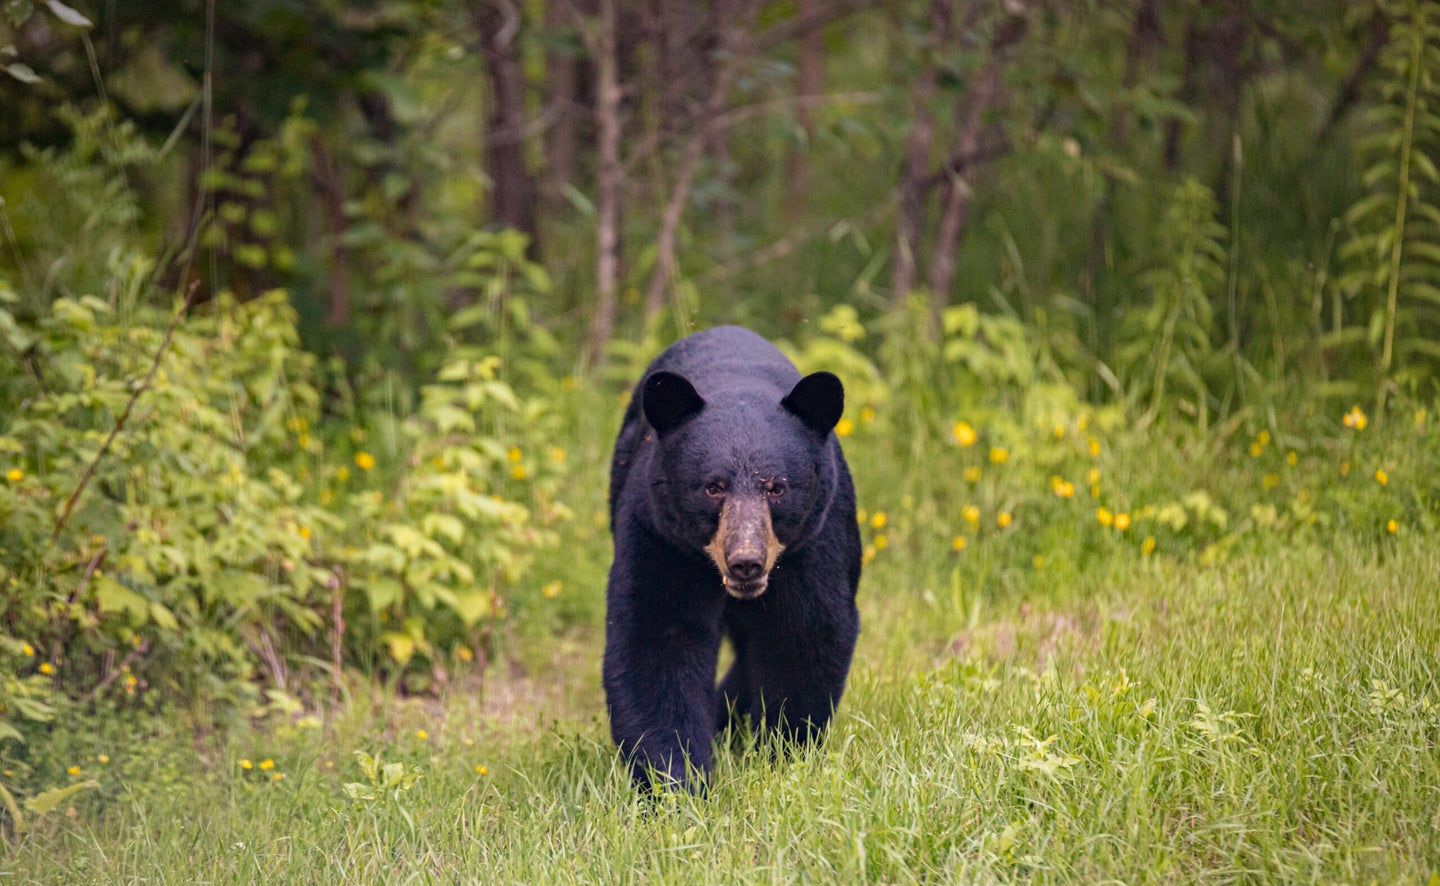 A black bear walks out of a forest and into a grassy field